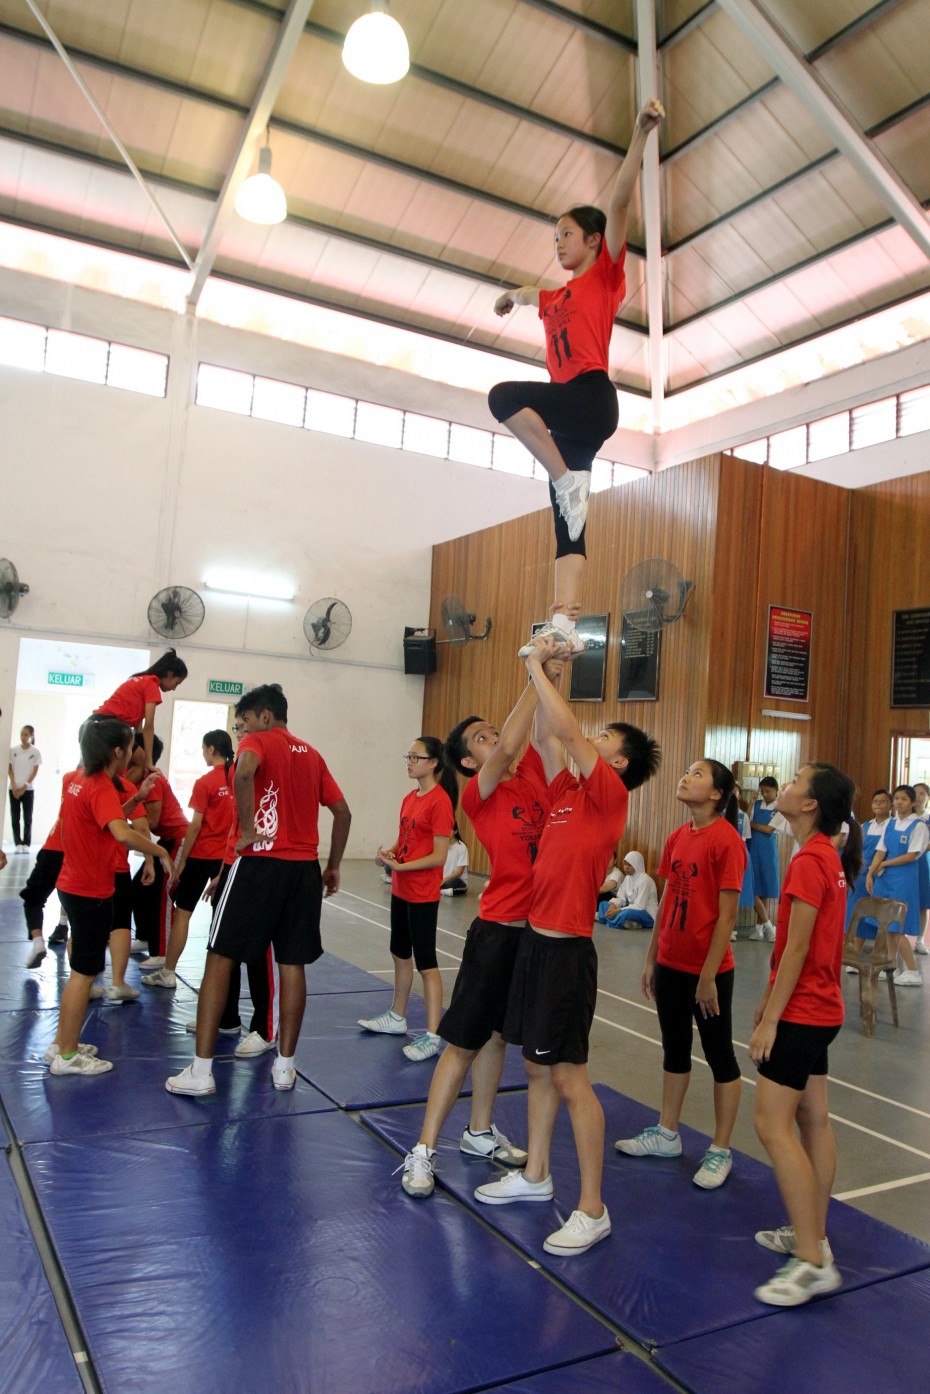 With CHEER 2014 just around the corner, teams around the nation, like the Mickeymitez, are taking their training sessions even more seriously now to retain fitness levels and prevent injury. 